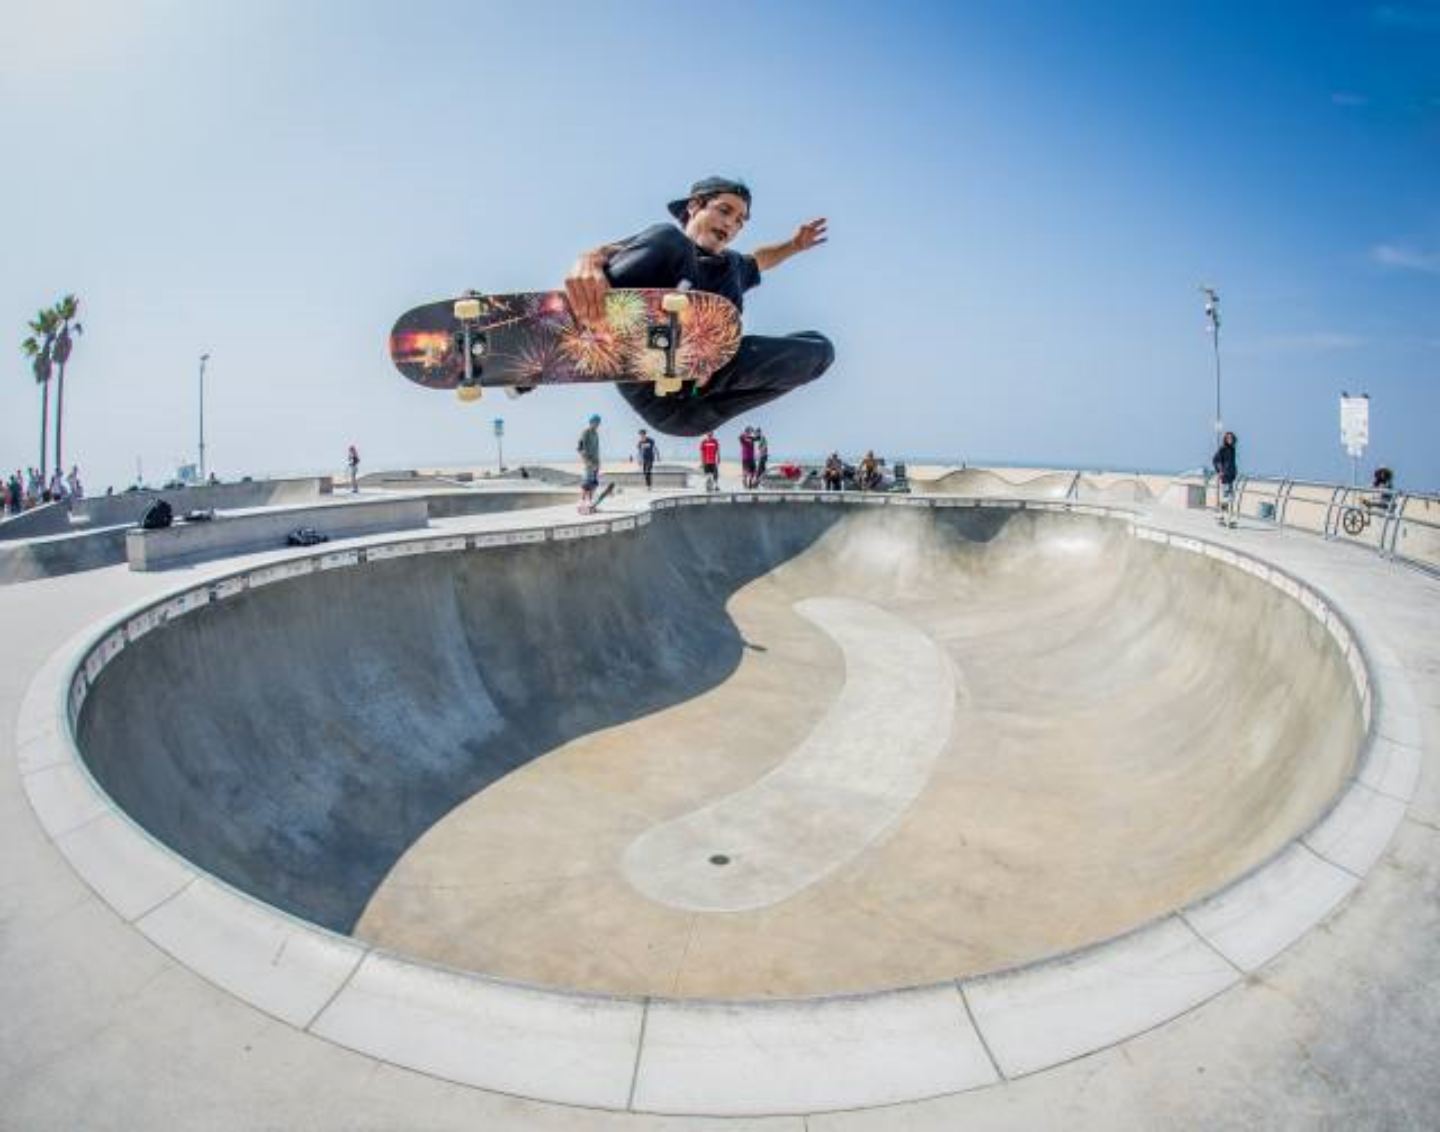 Skateboarding in Japan: From Cultural Underground to Mainstream